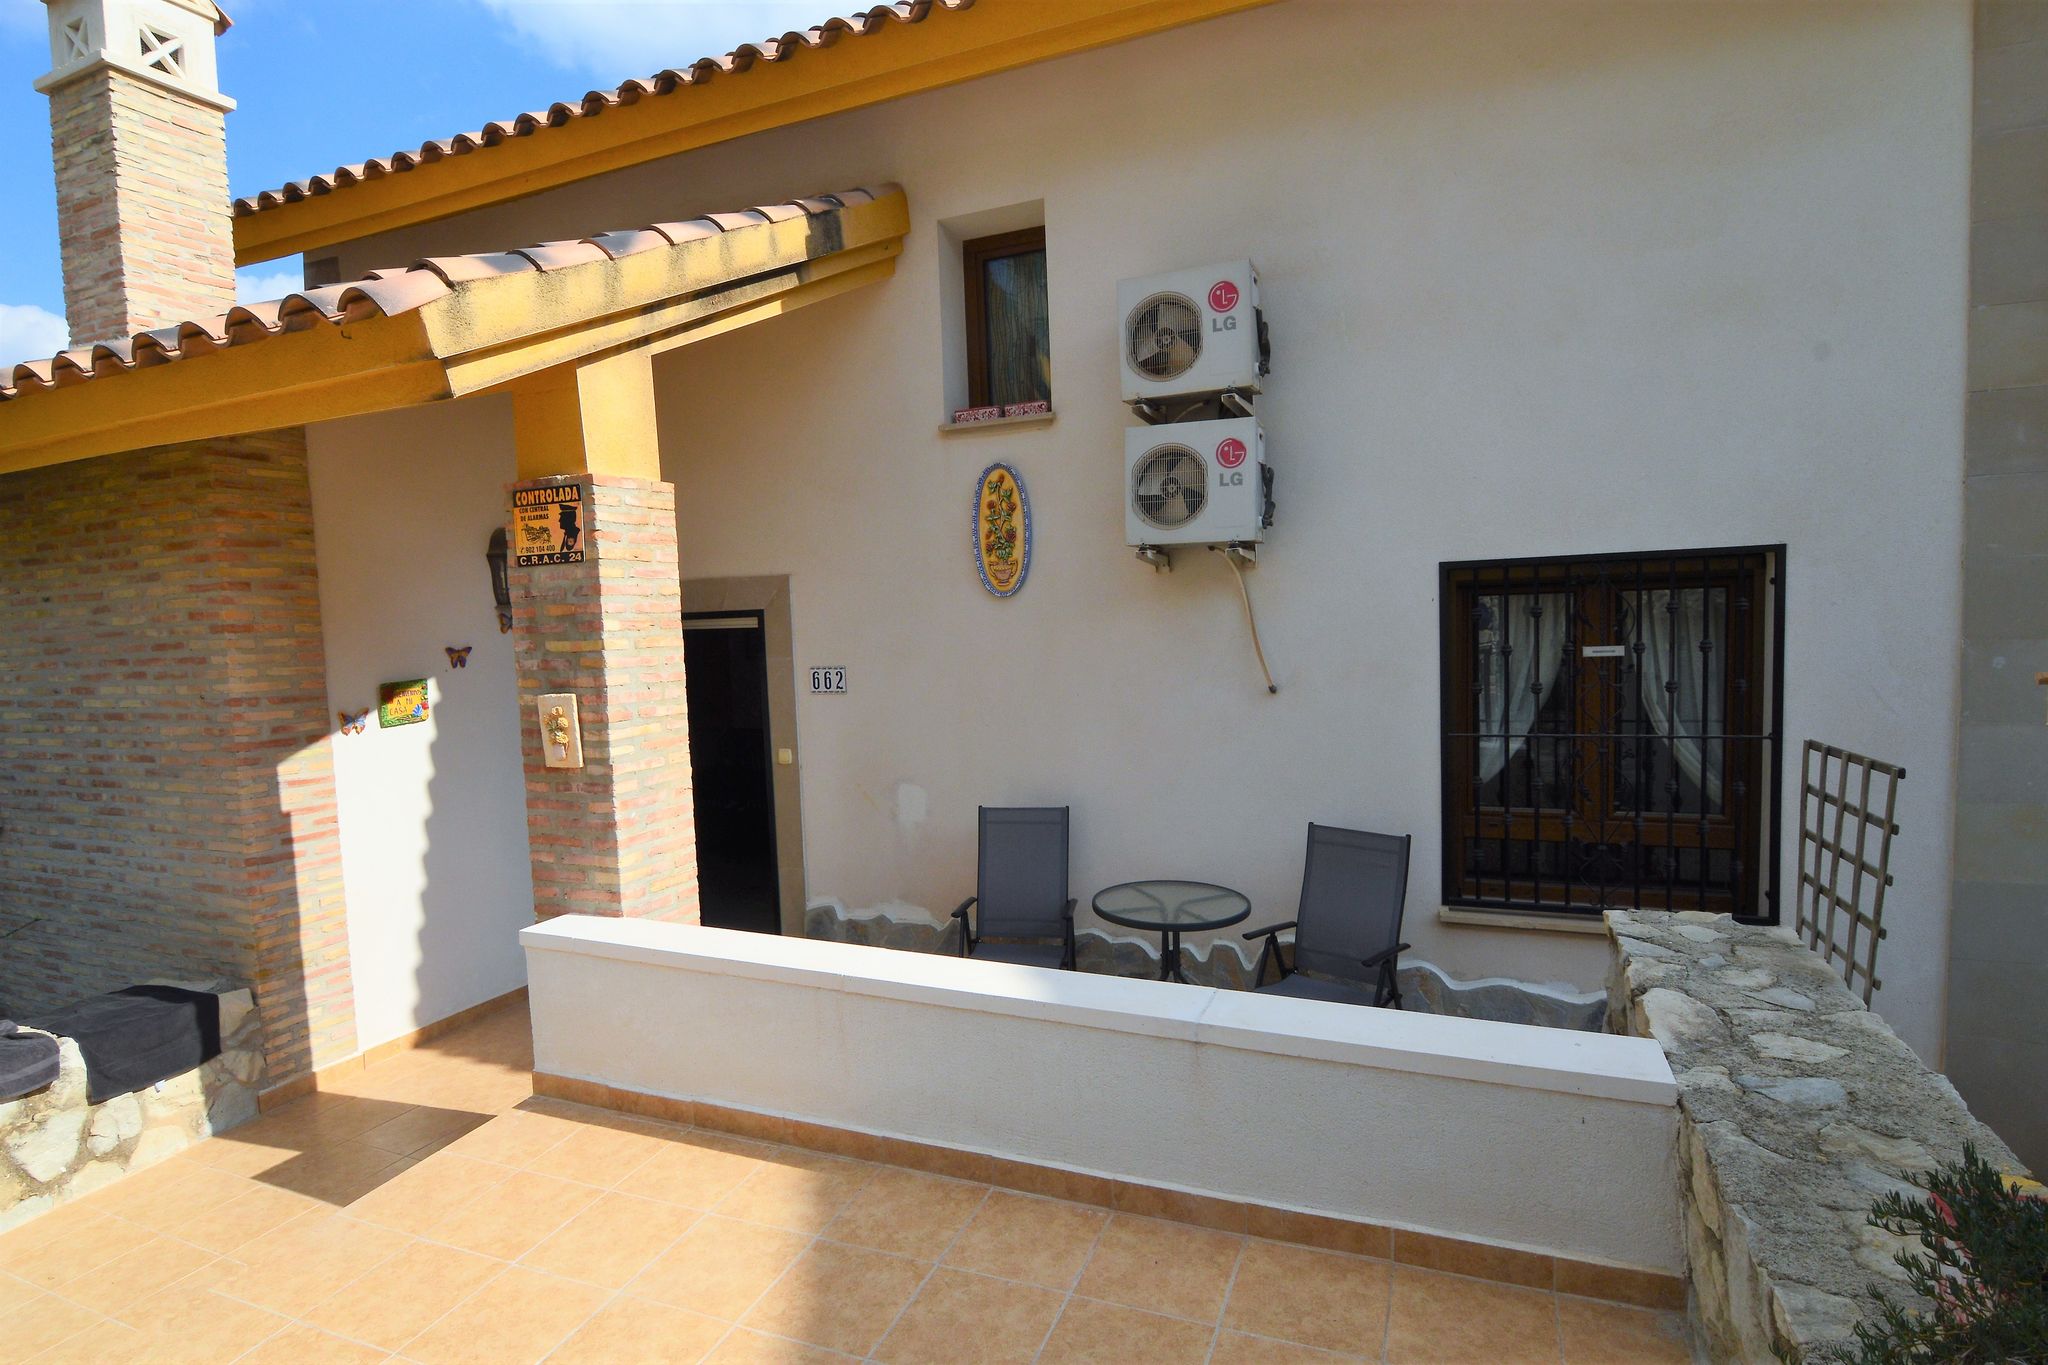 Great villa with Algorva with a view of the golf course